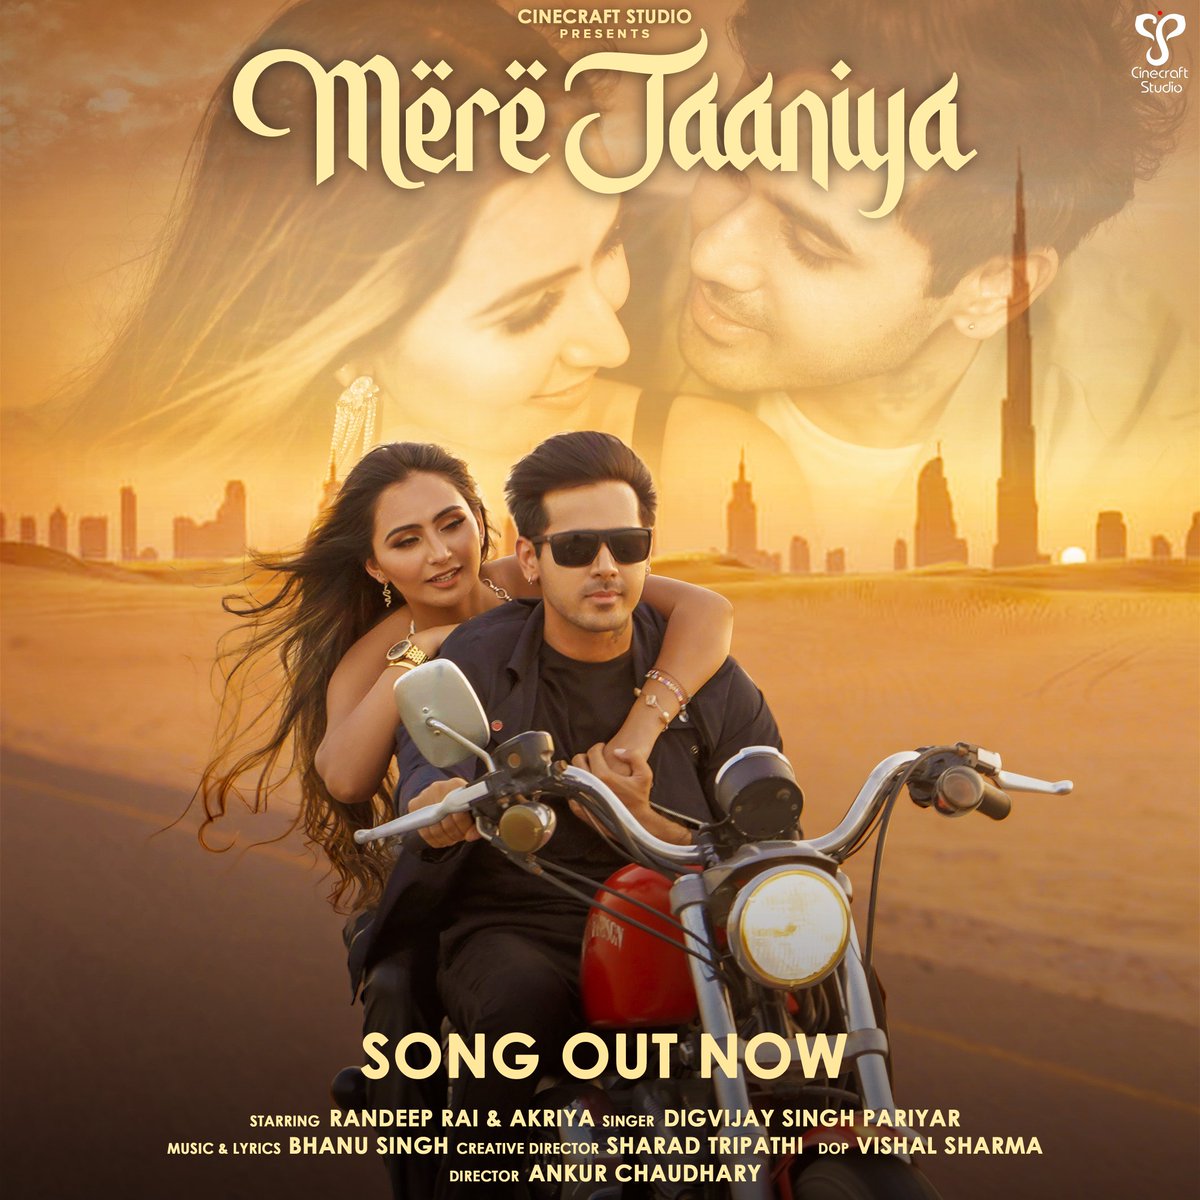 Song out #MereJaaniya 🥰 Click here to watch it : youtu.be/LnIf66nhspI